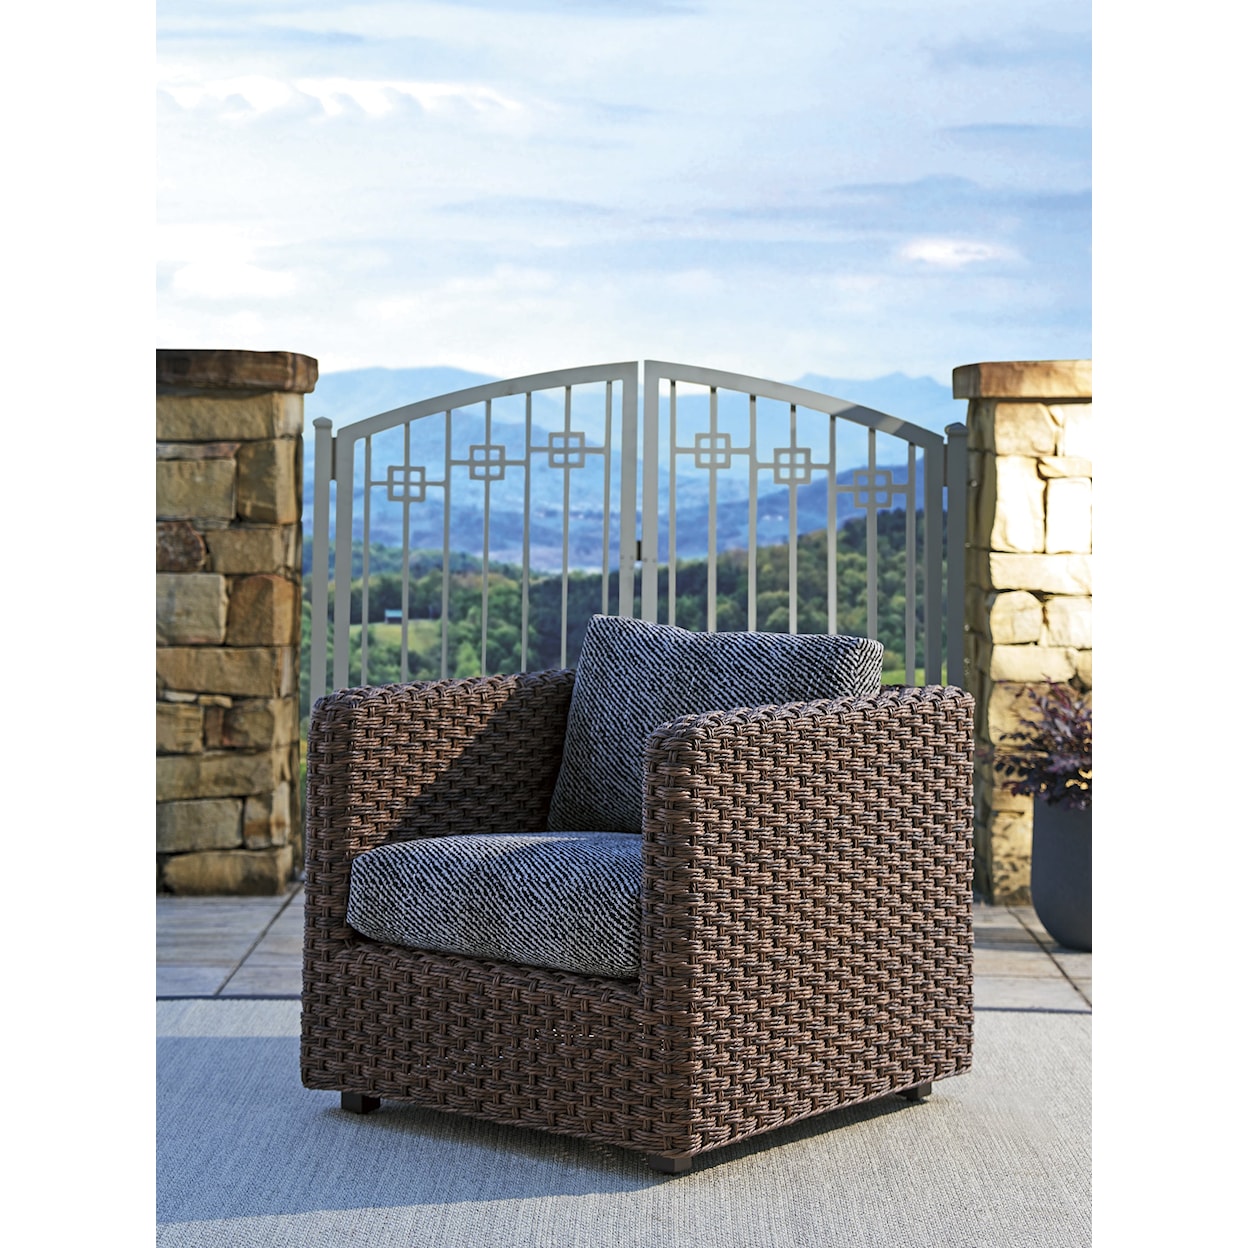 Tommy Bahama Outdoor Living Kilimanjaro Outdoor Lounge Chair